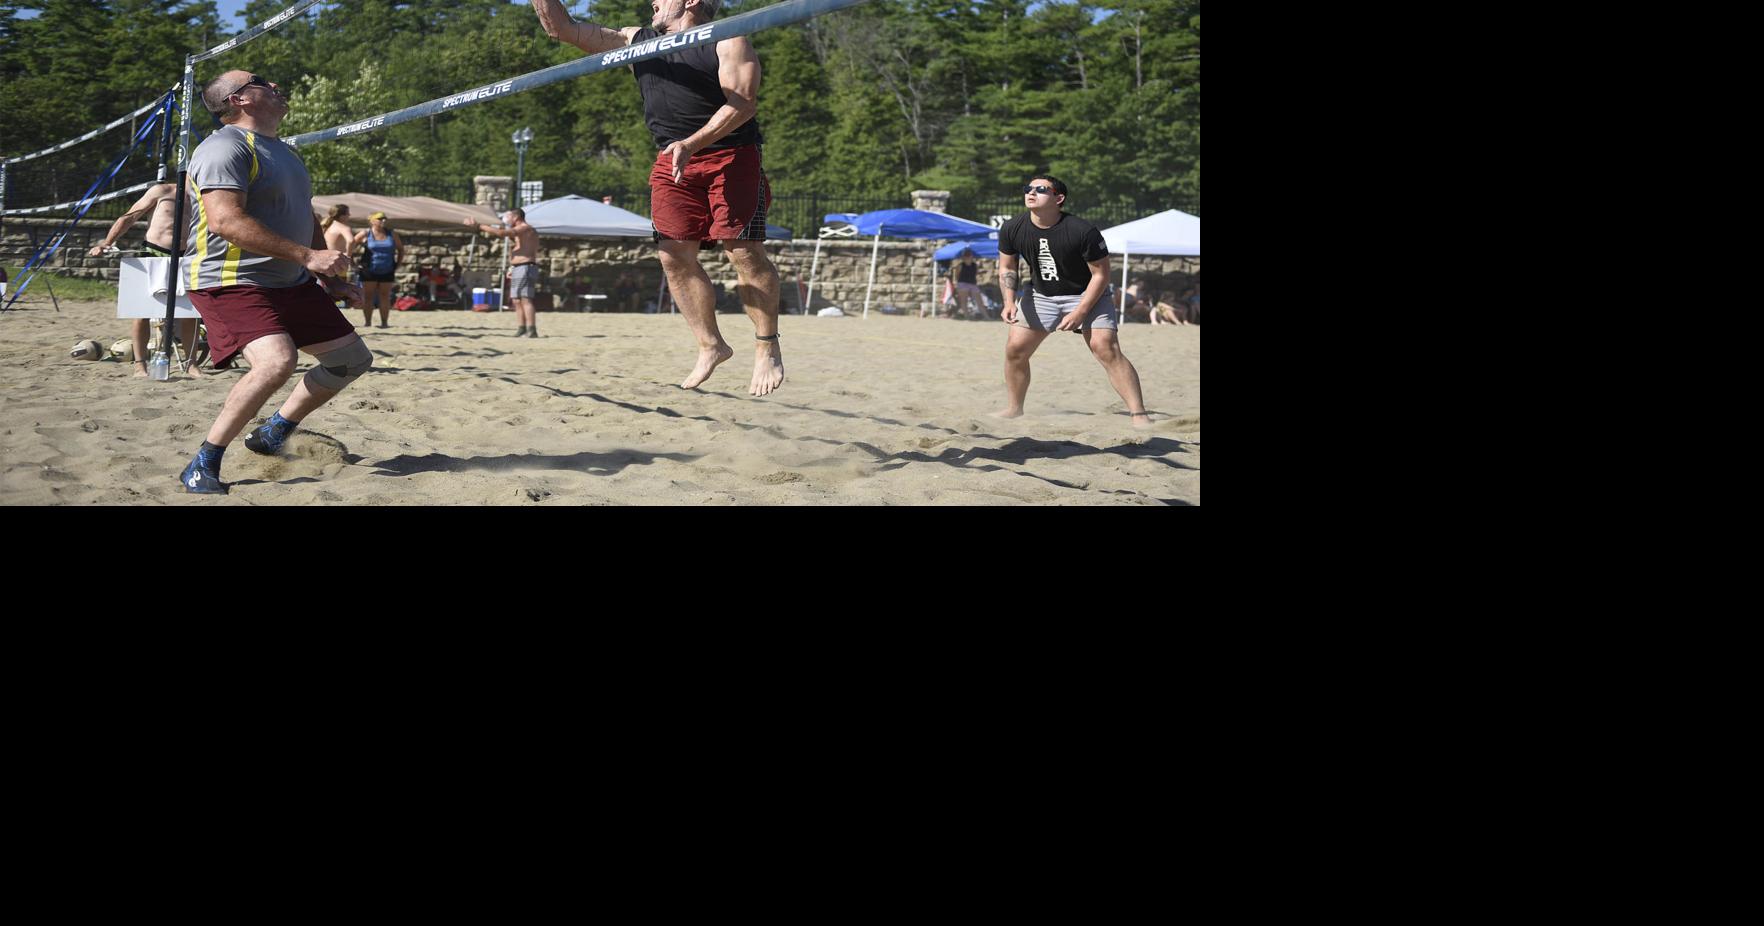 Million Dollar Beach Volleyball Tournament grows in scope, popularity